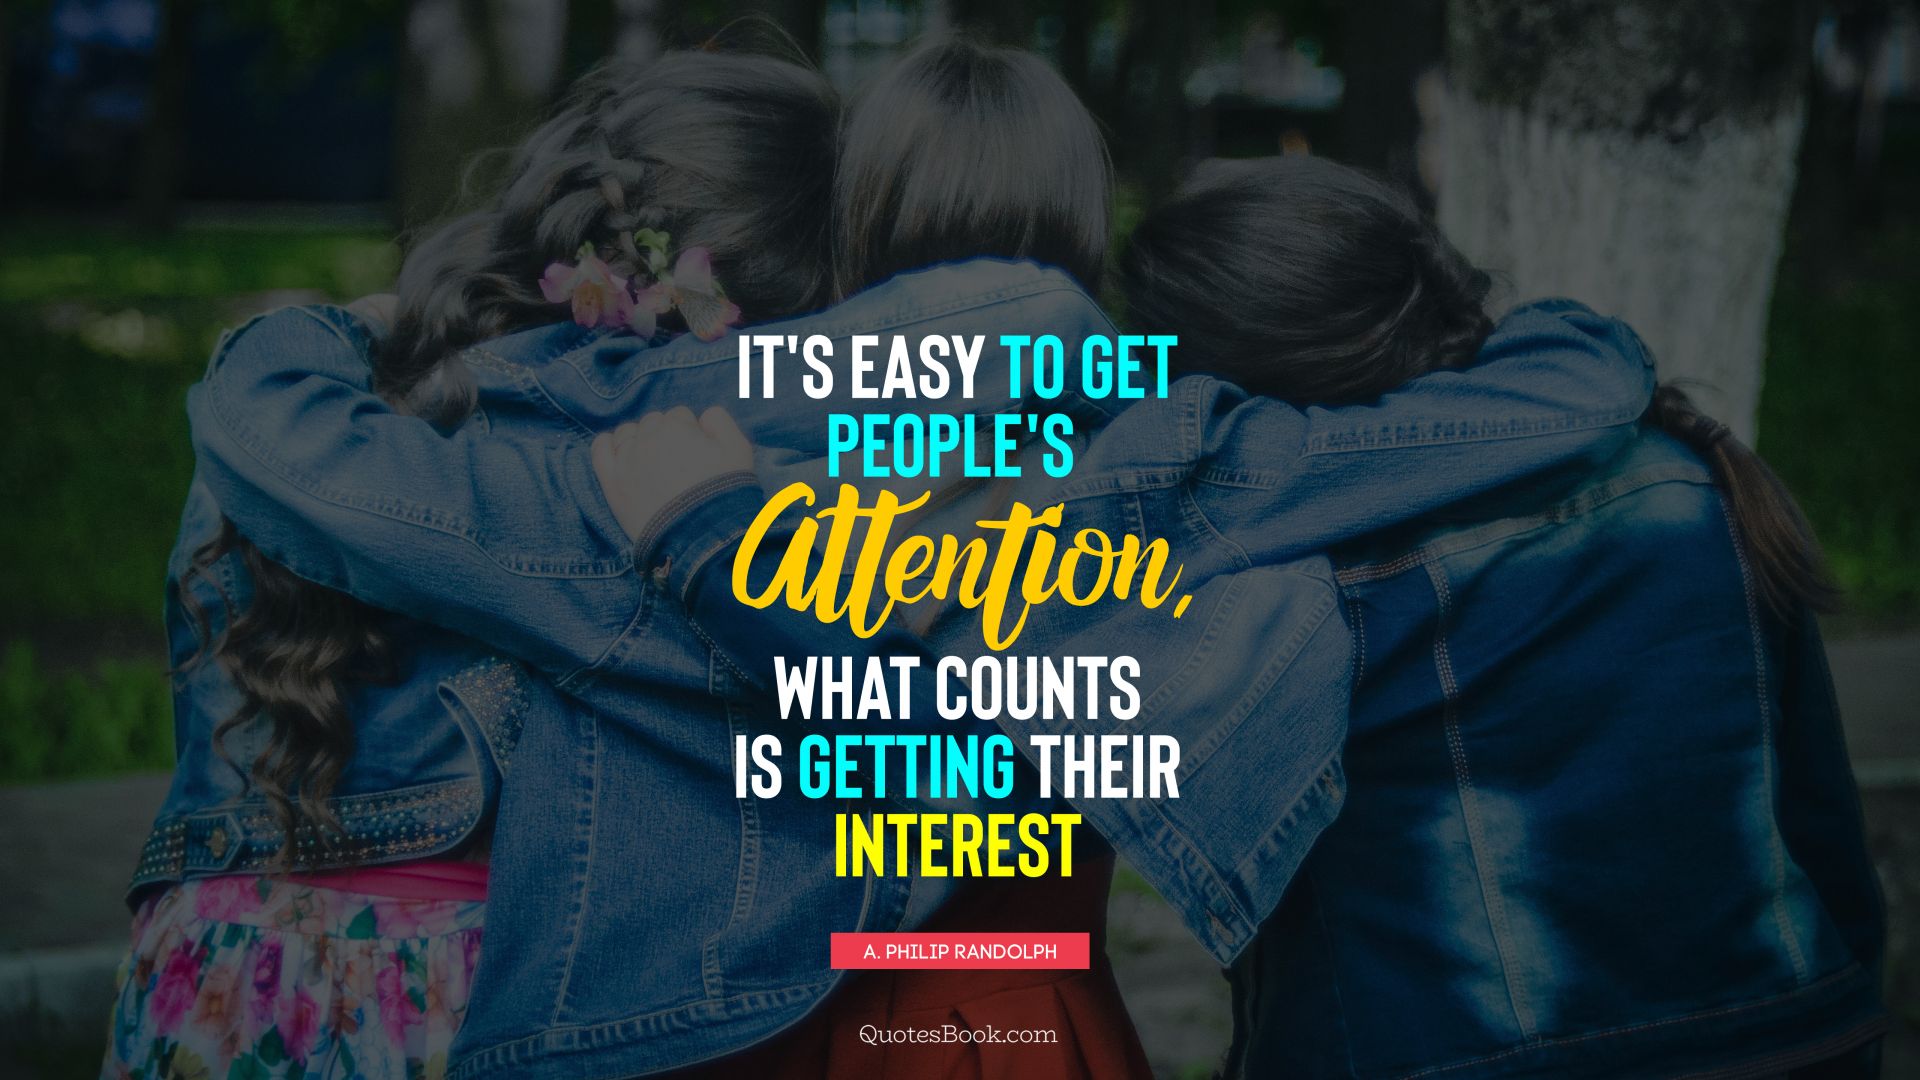 It's easy to get people's attention, what counts is getting their interest. - Quote by A. Philip Randolph